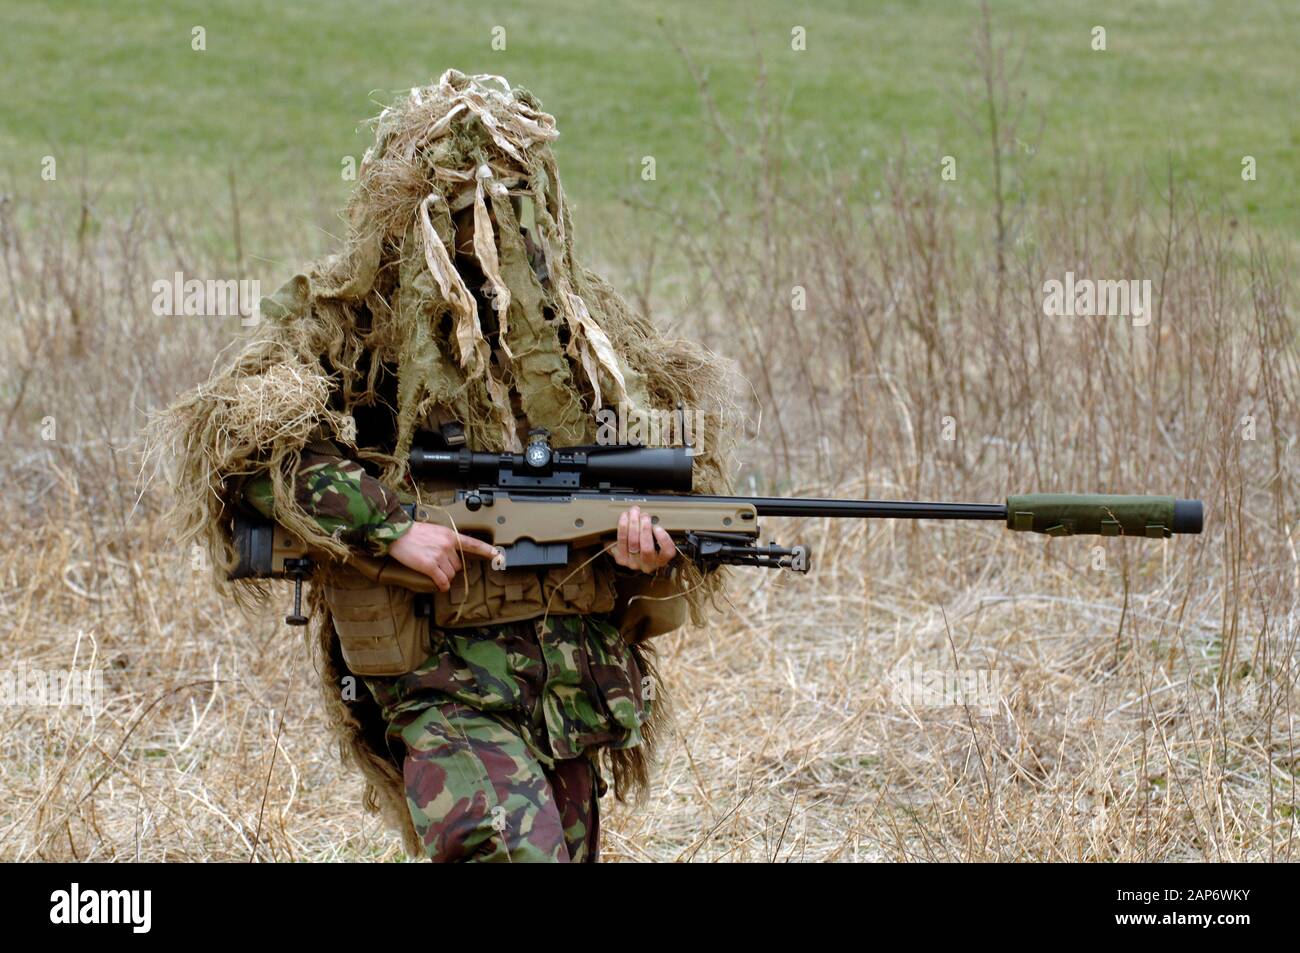 British Infantryman with a long range sniper rifle L115A3 which has a killing capability from over a mile. Stock Photo